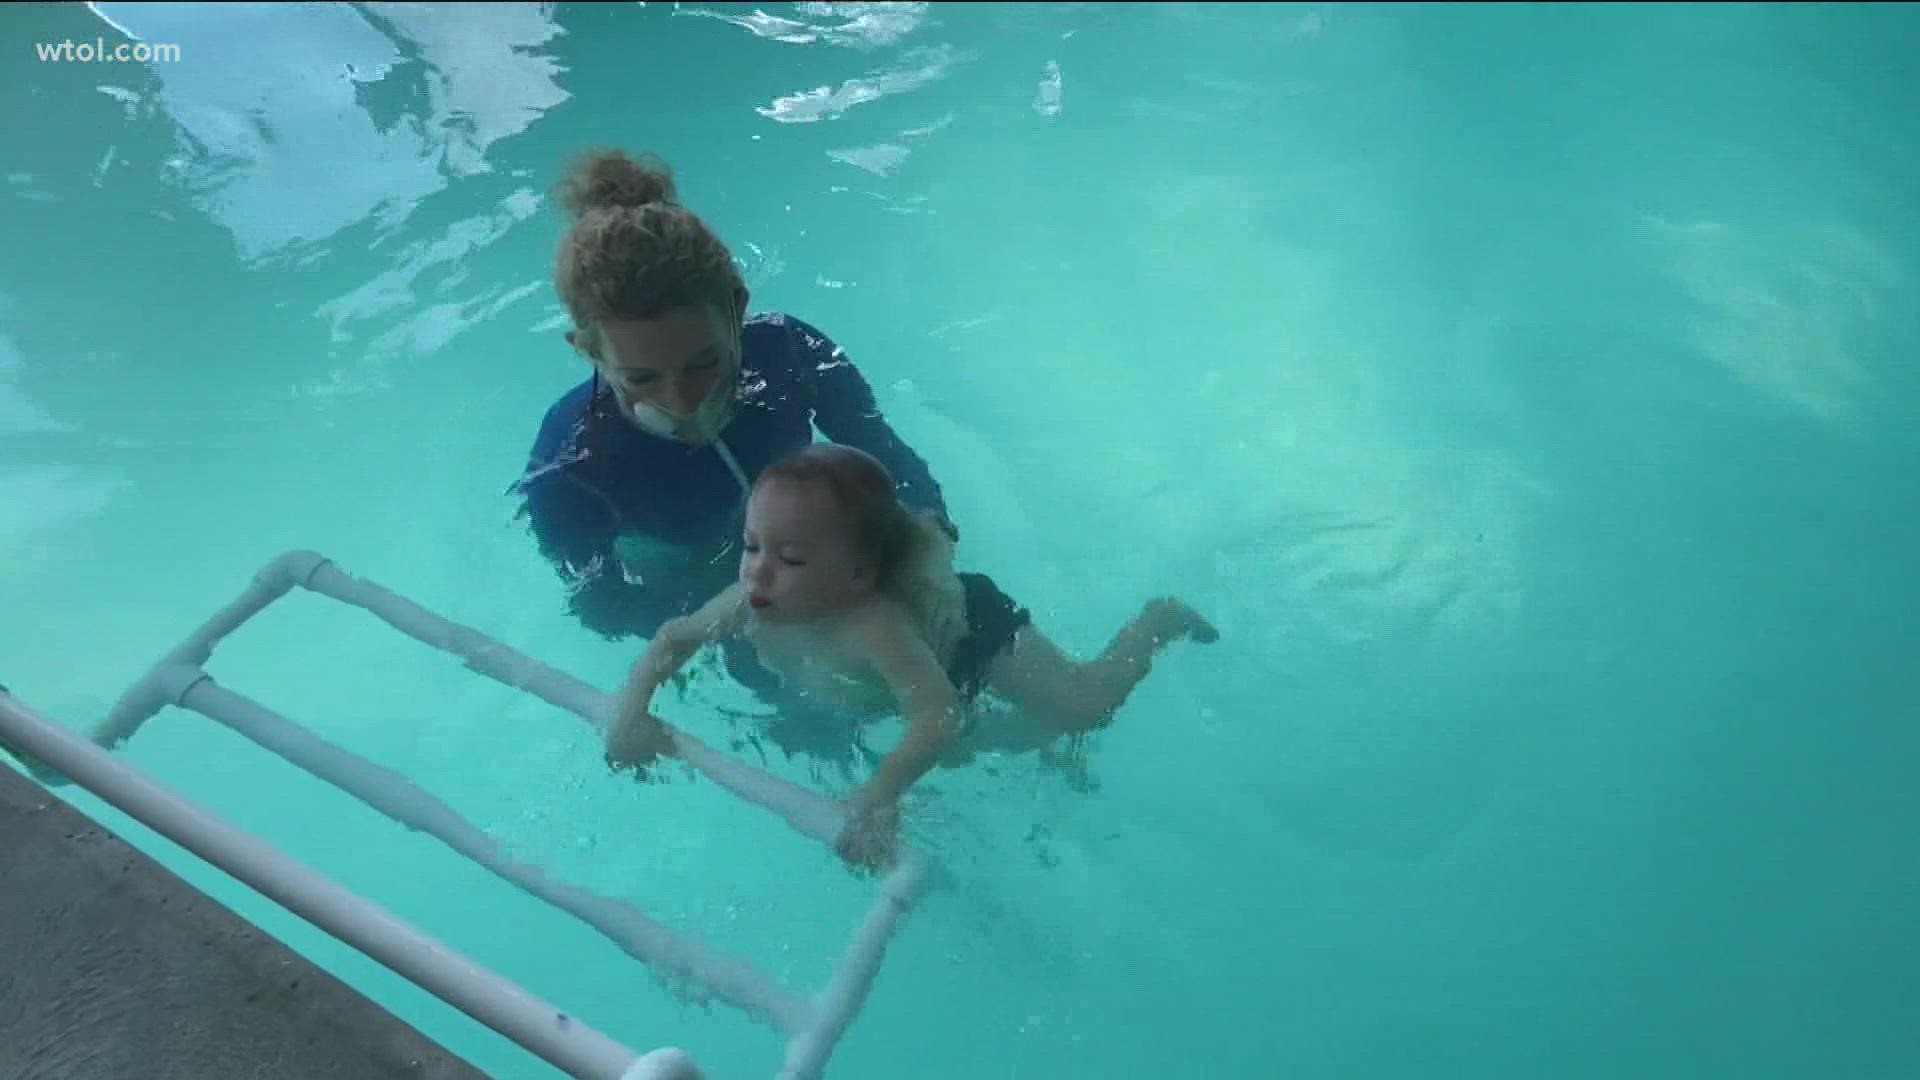 Michelle is helping families get their kids ISR swim lessons, which are swim lessons that teach babies as young as six months how to rescue themselves.